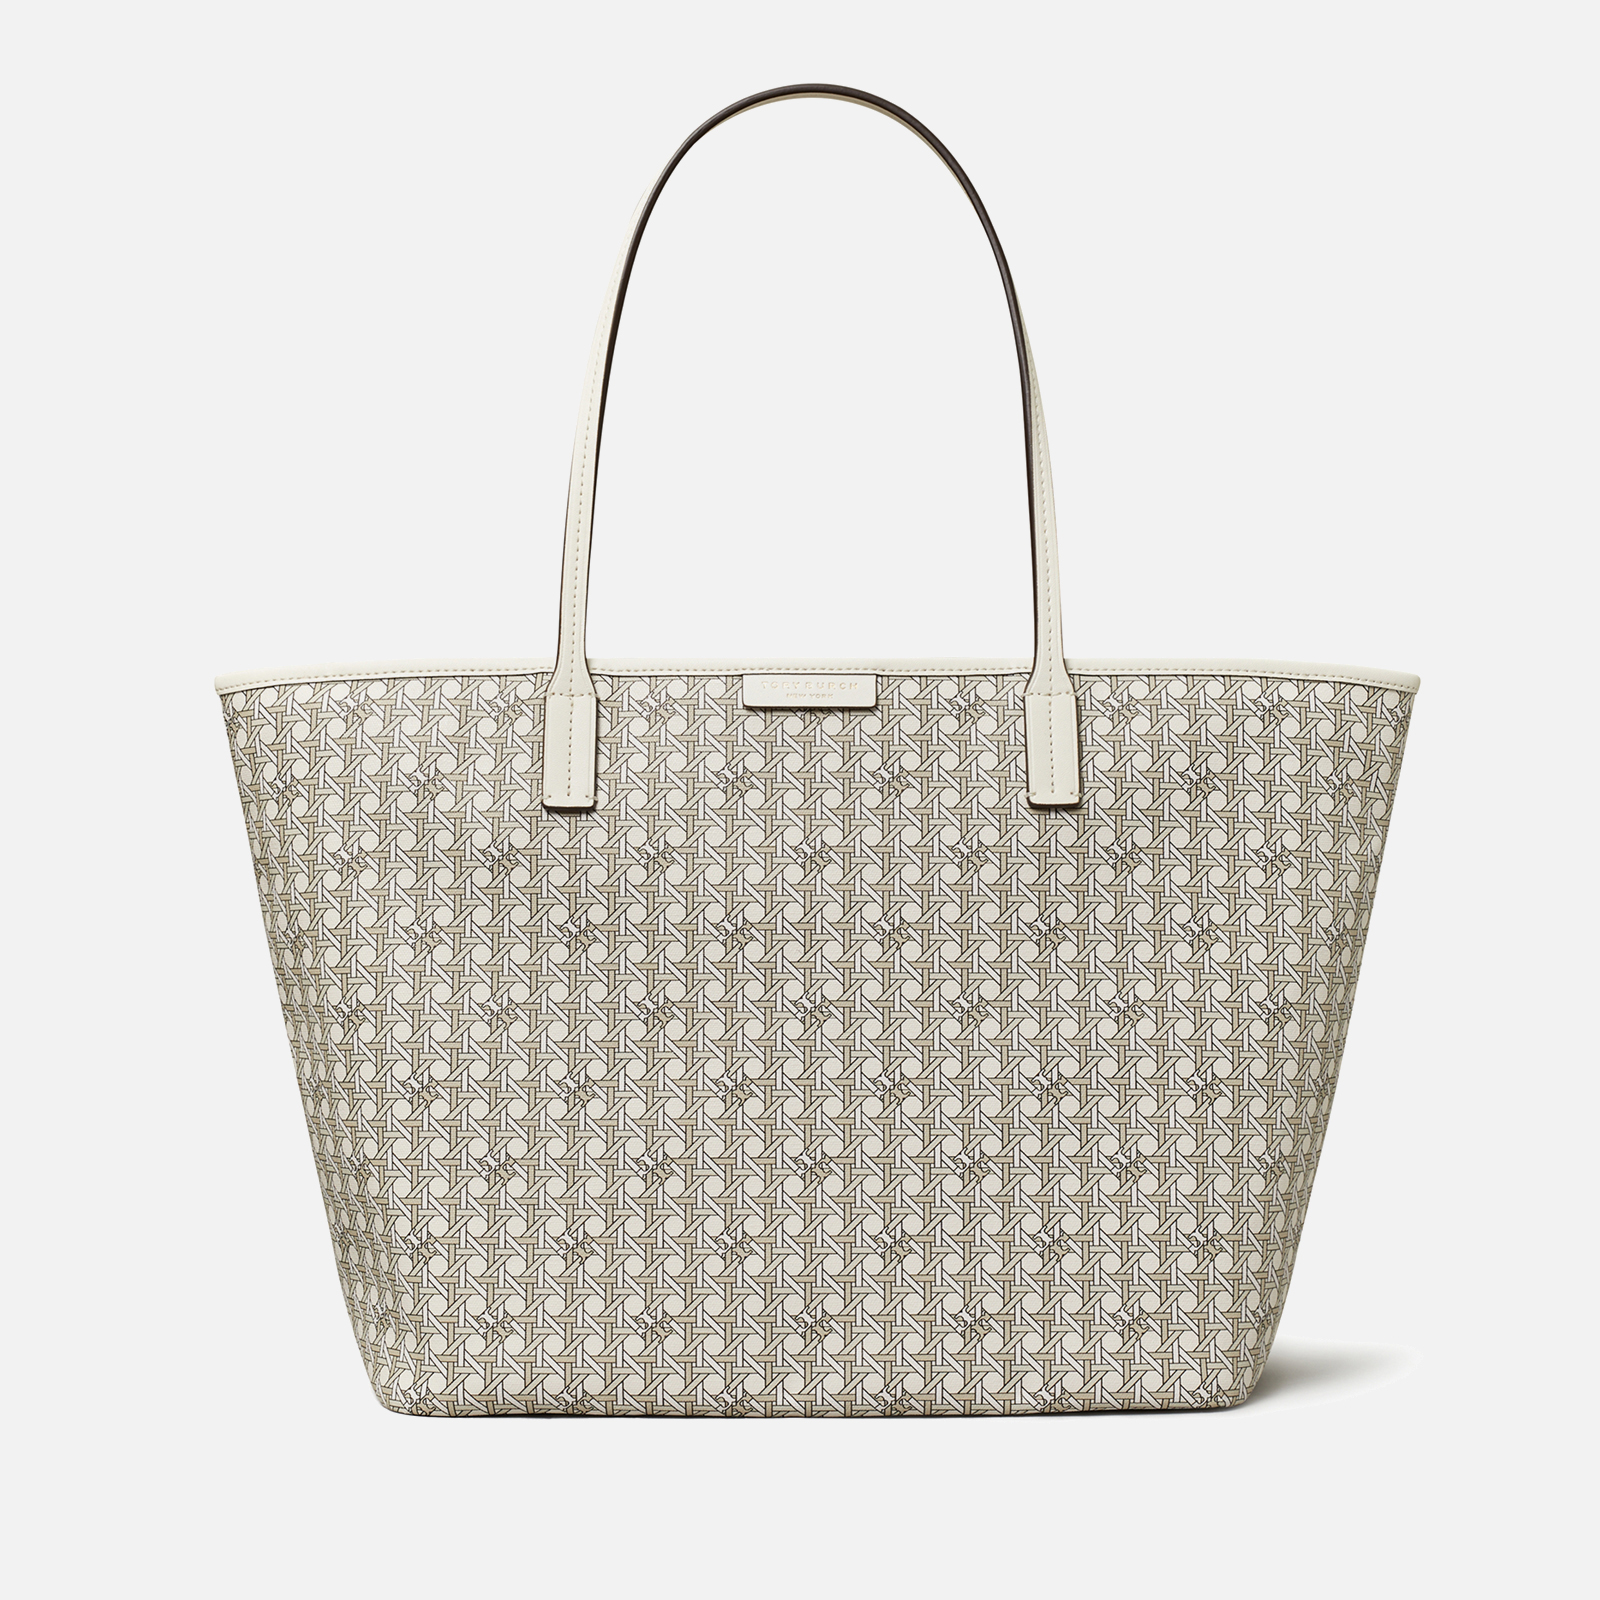 Tory Burch Ever-Ready Monogram Coated-Canvas Tote Bag | Coggles